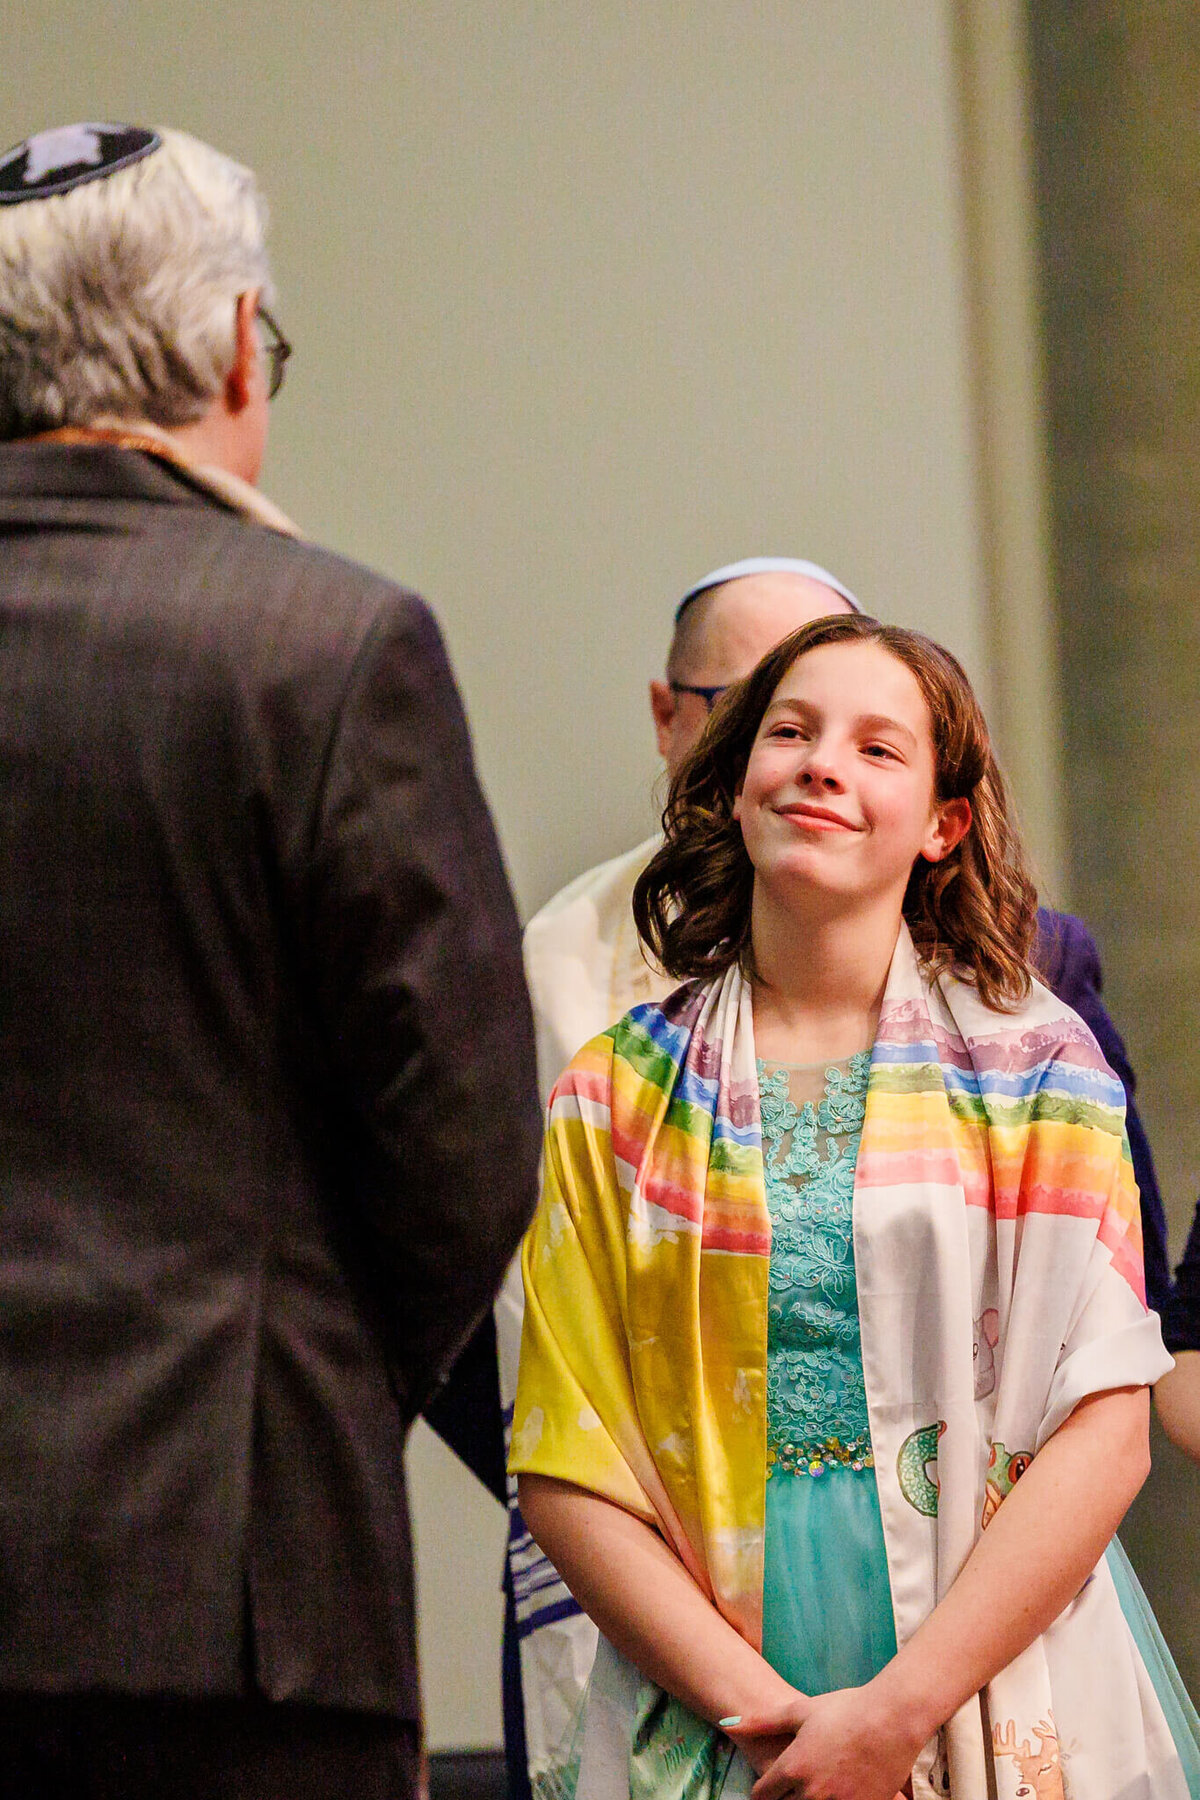 A teenage girl listens with a smile to her rabbi while wearing a blue dress under a rainbow tallit